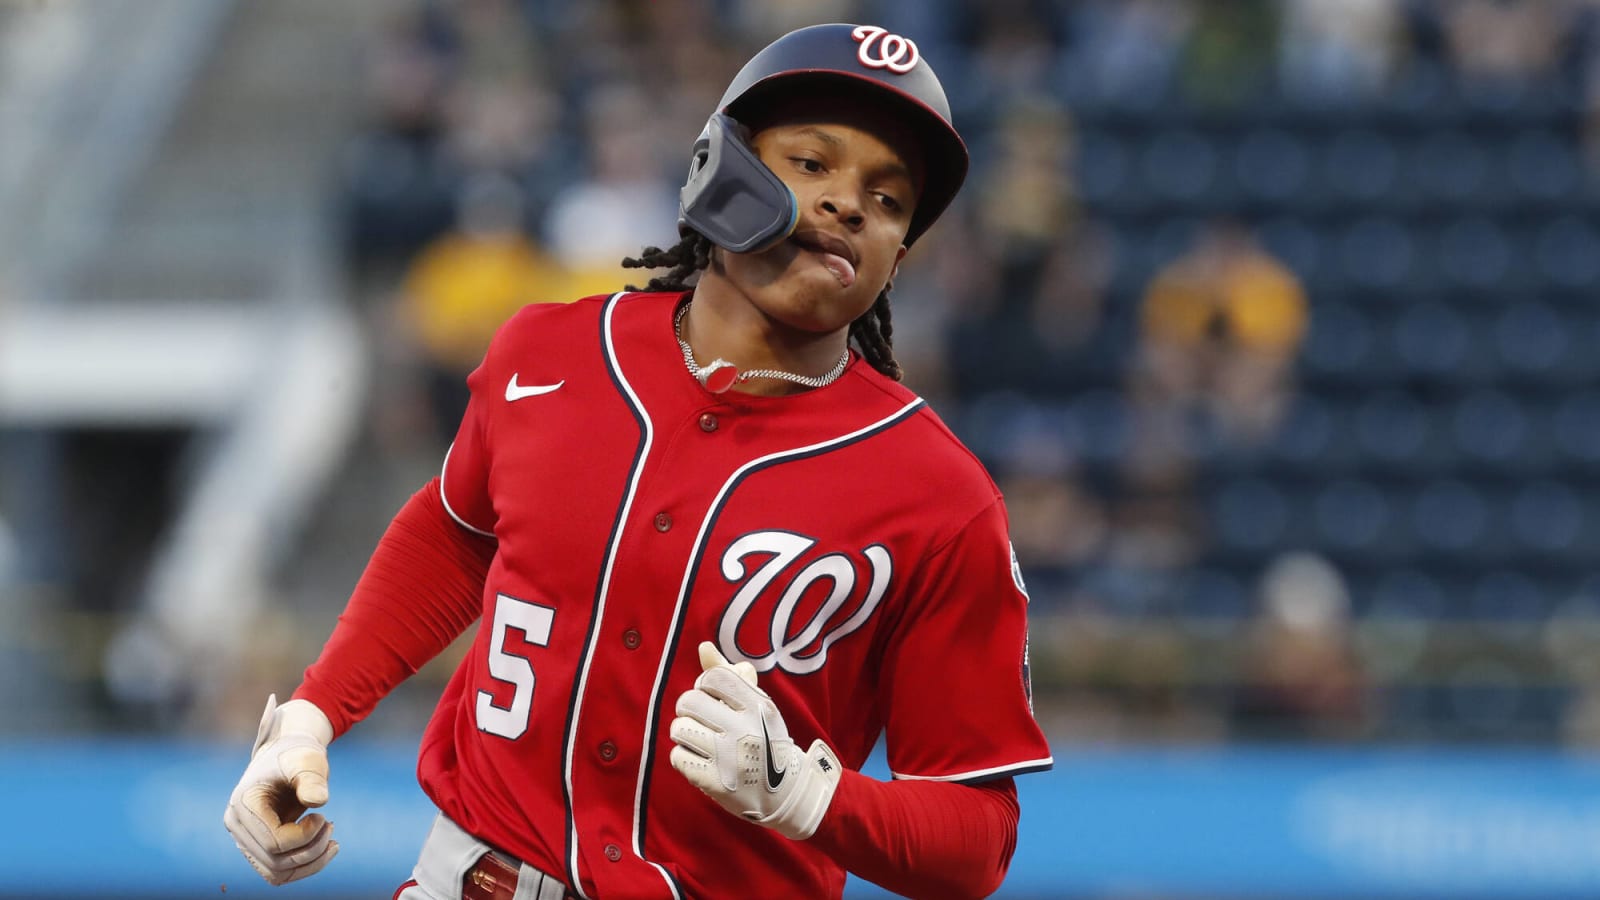 CJ Abrams is Blossoming Into a Star For the Nationals